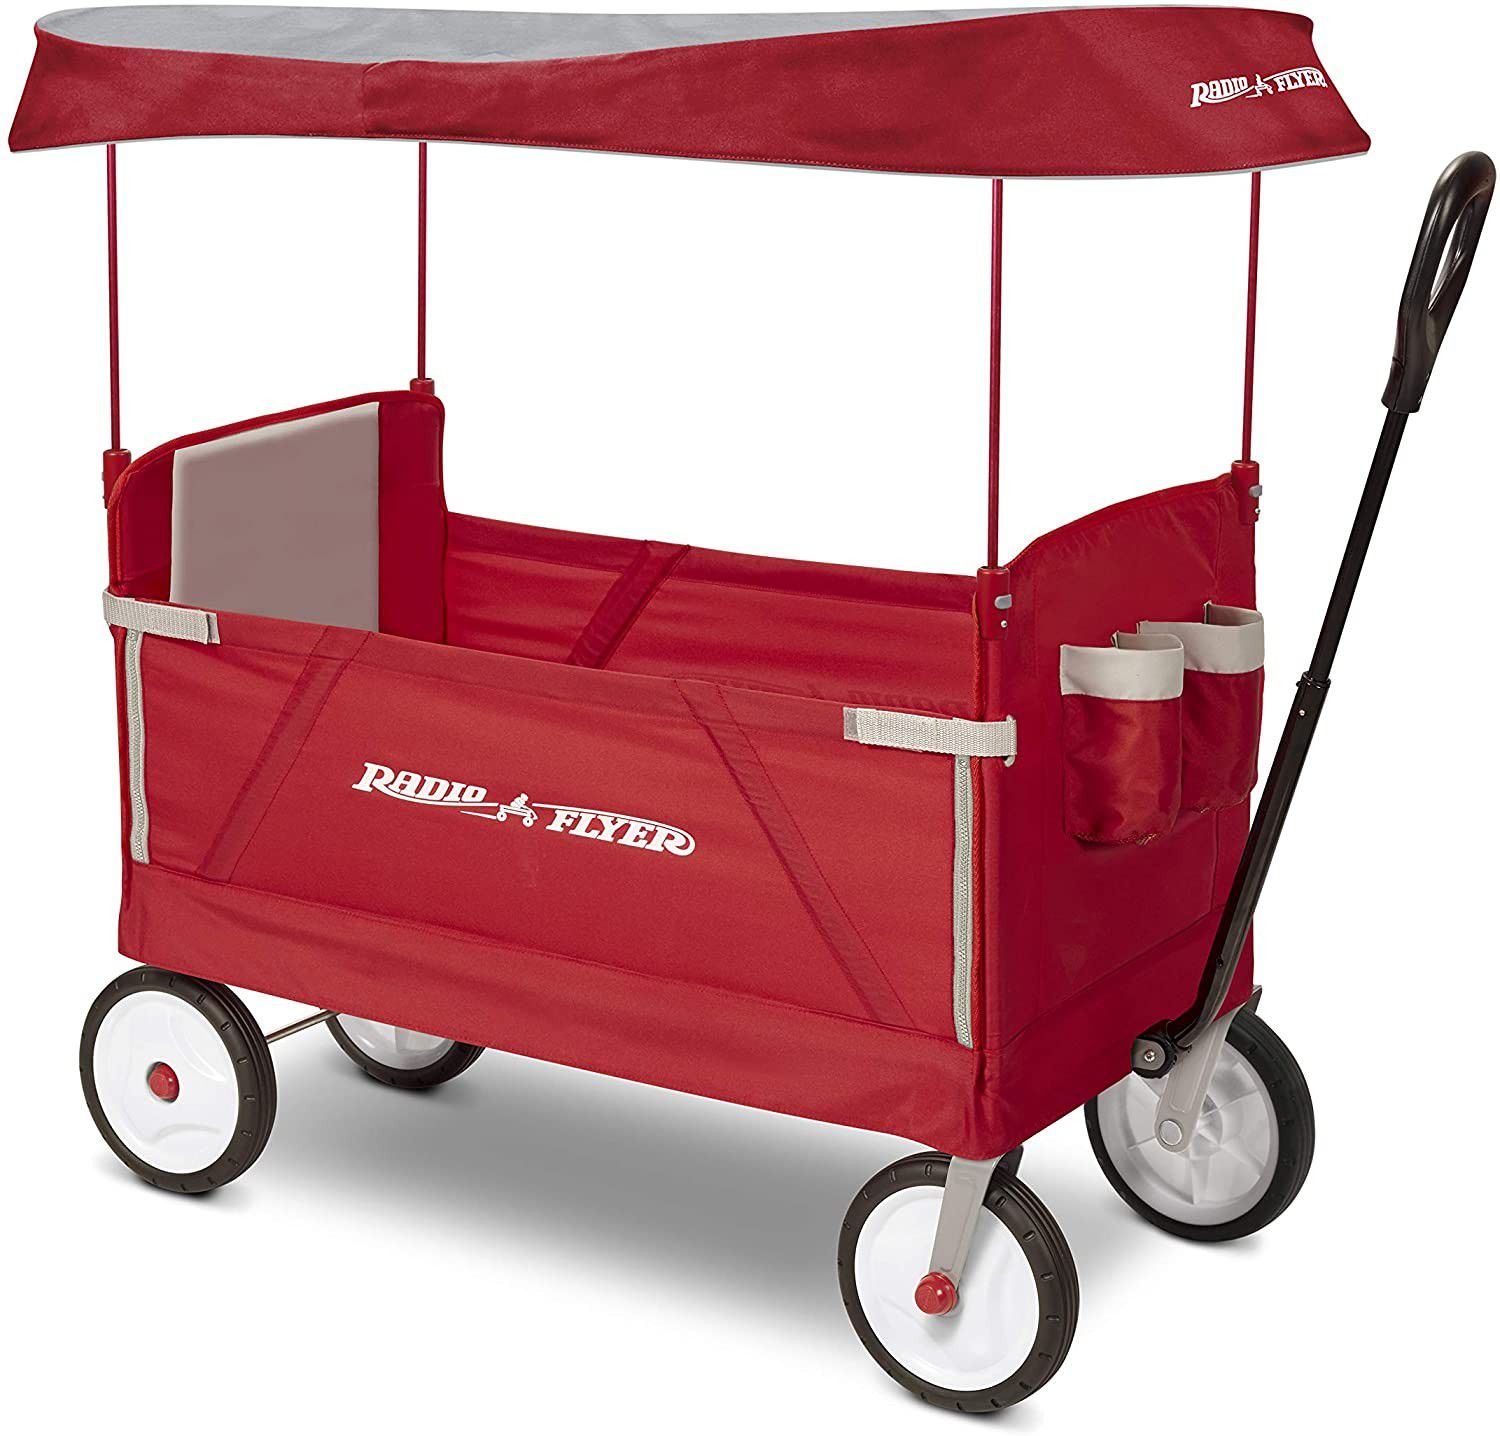 3-In-1 EZ Folding, Outdoor Collapsible Wagon for Kids & Cargo, Red